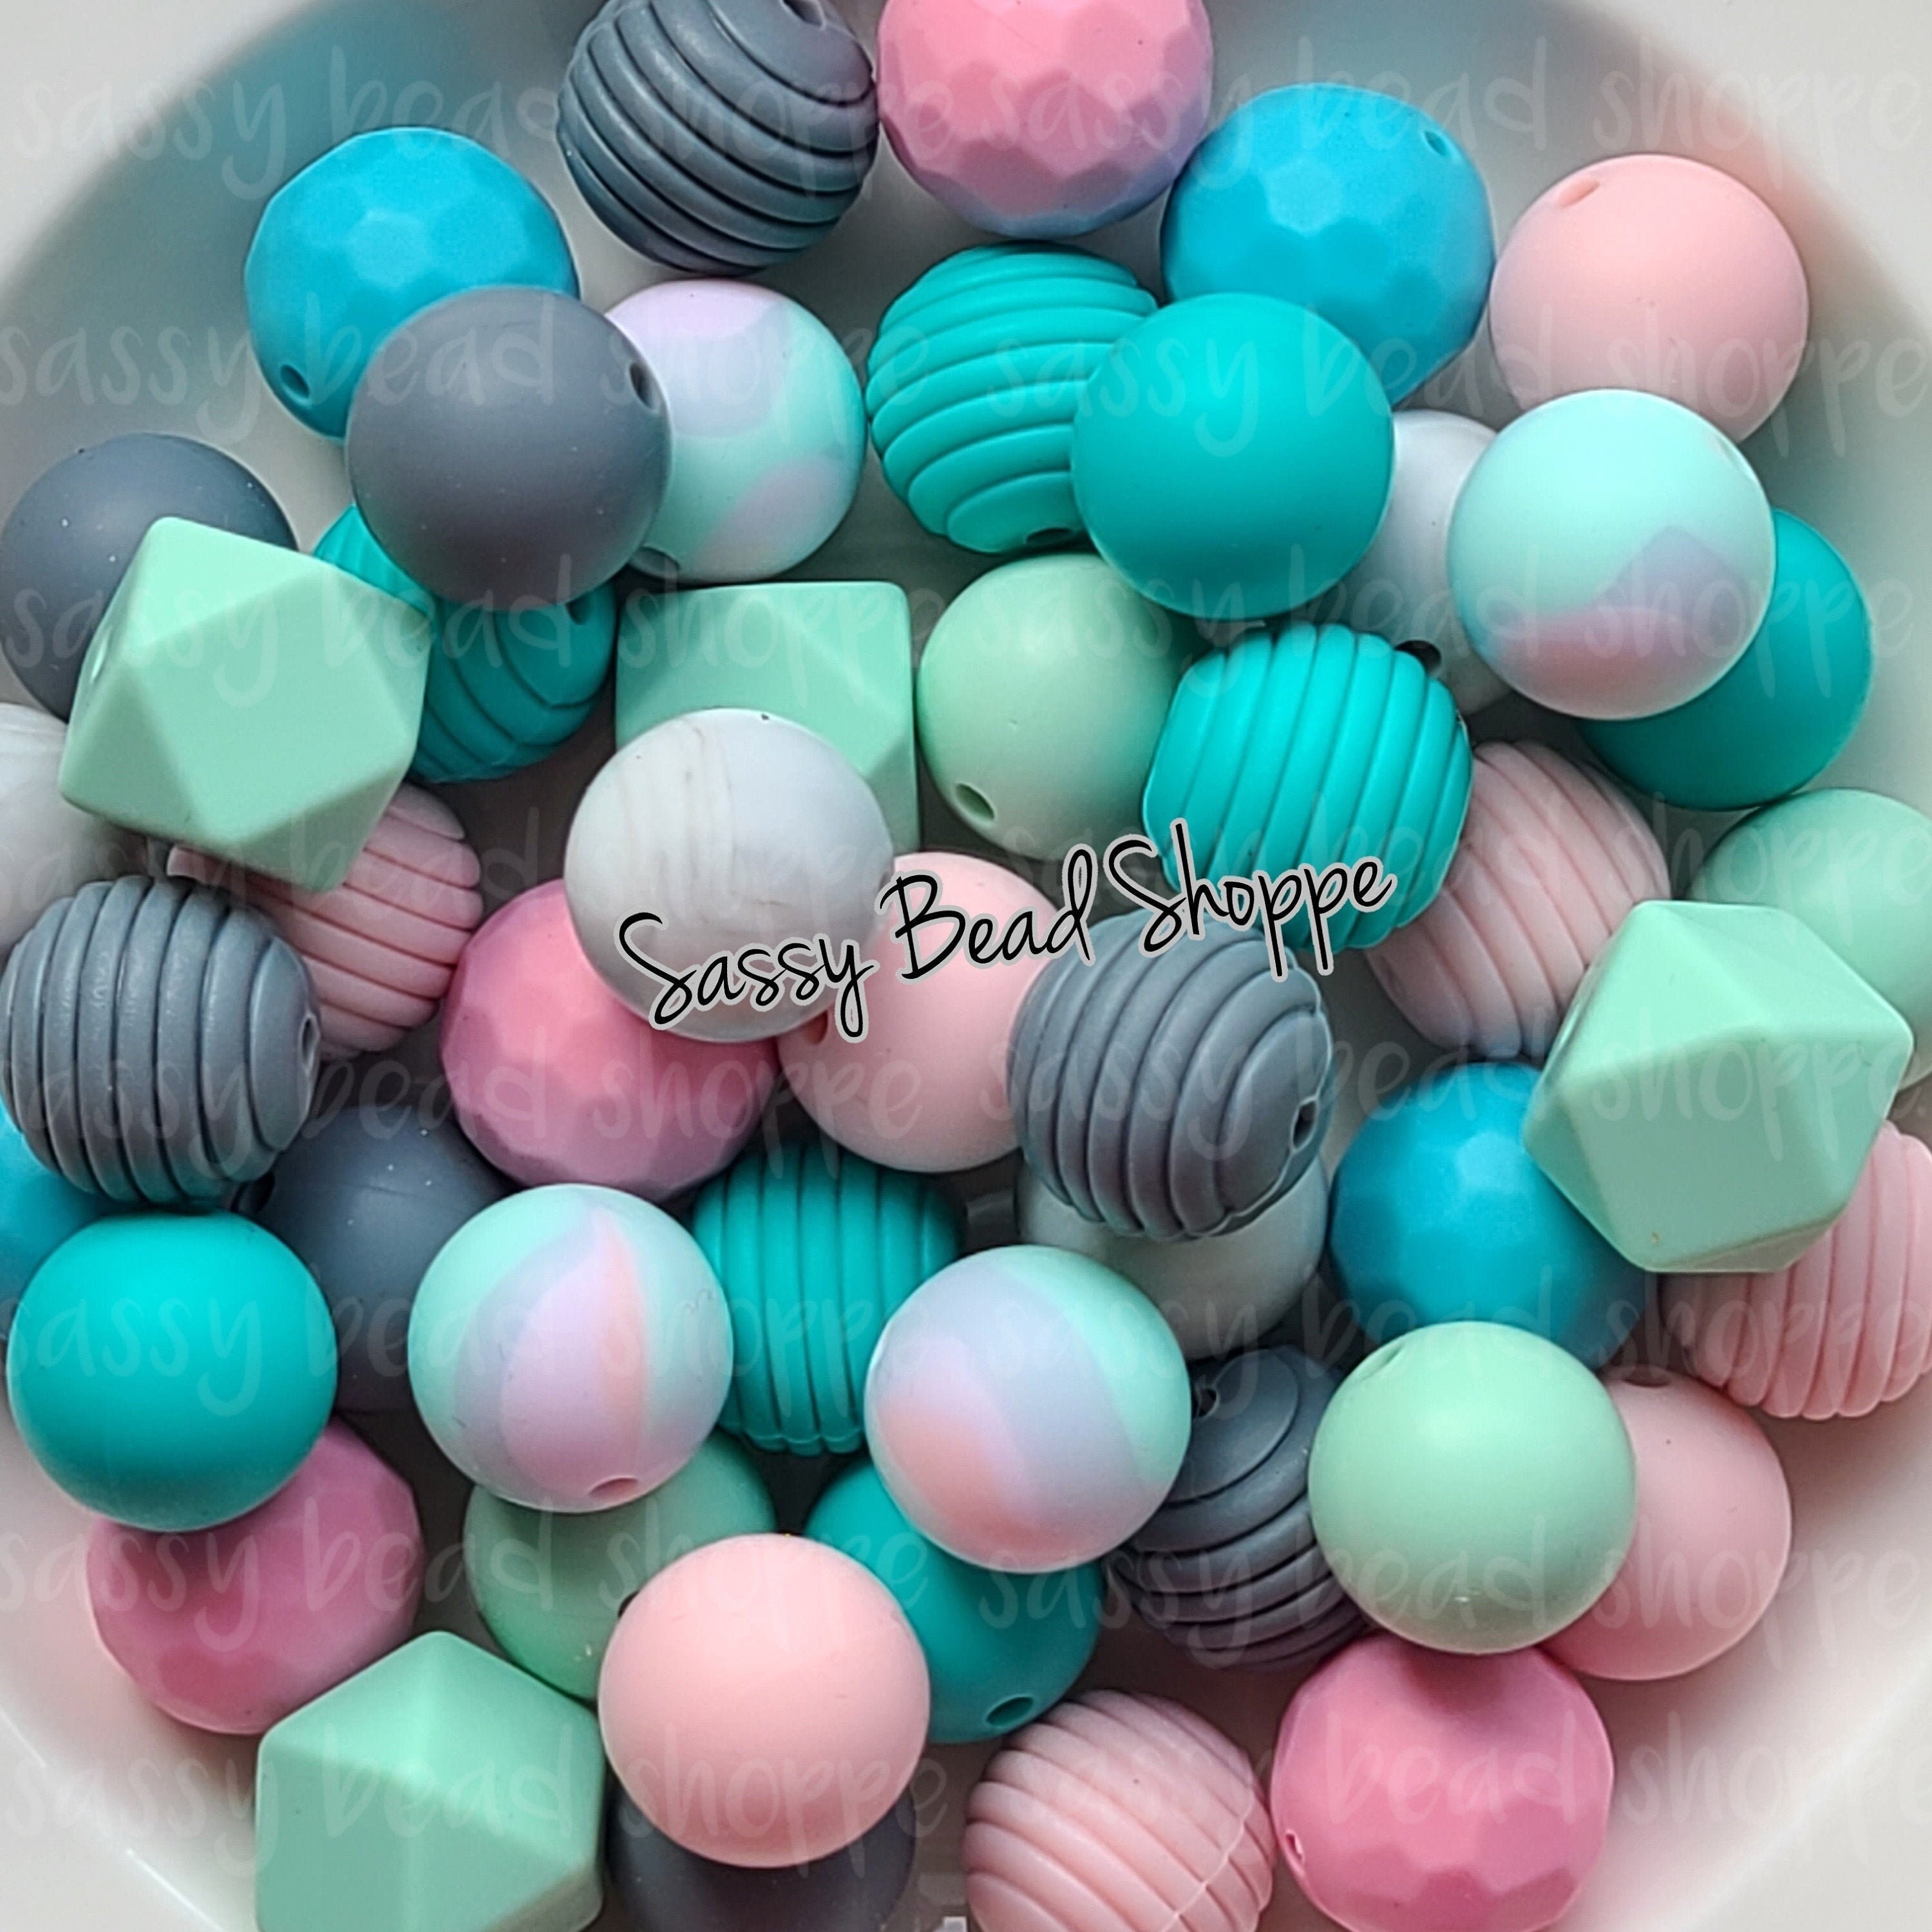 711 Focal Beads, store Focal Beads, Silicone Focal Beads, Pen Beads, Bulk  Beads, Jewelry Supplies, Decoden, Phone Charms, Beads